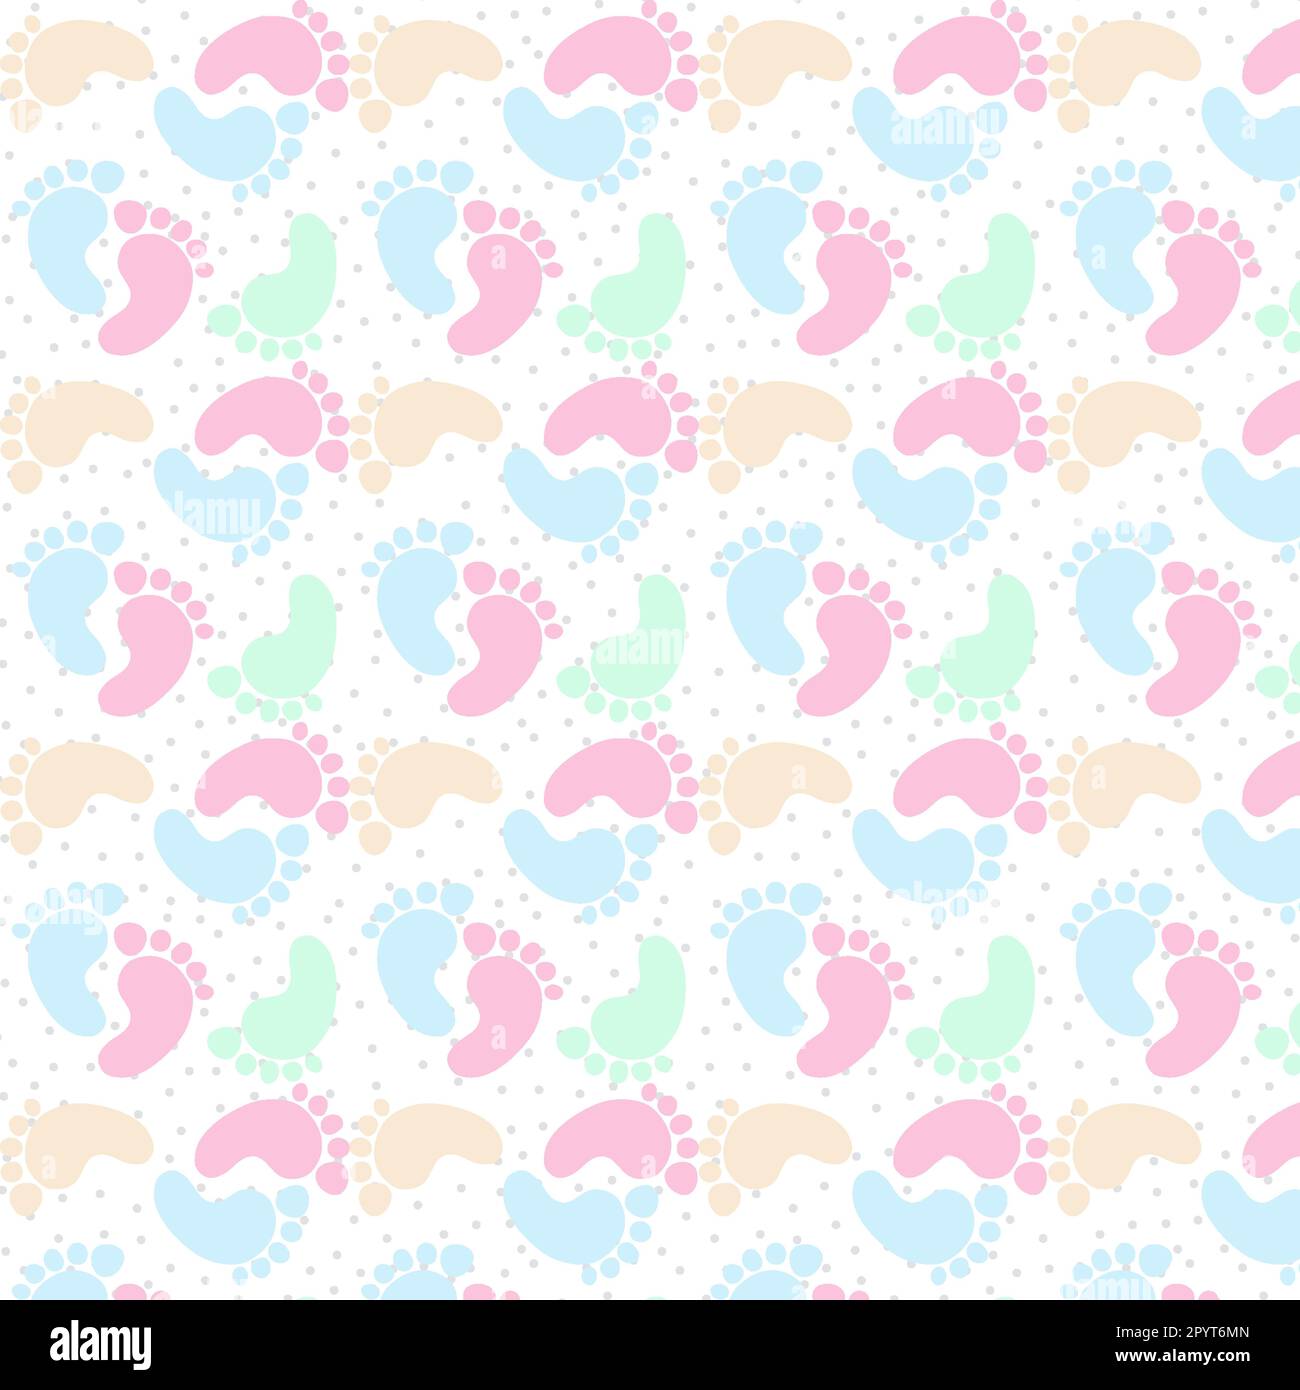 Baby Foot Print Pattern. Cute Pastel Color Baby Foot Print Pattern With Polka Dot Stock Vector